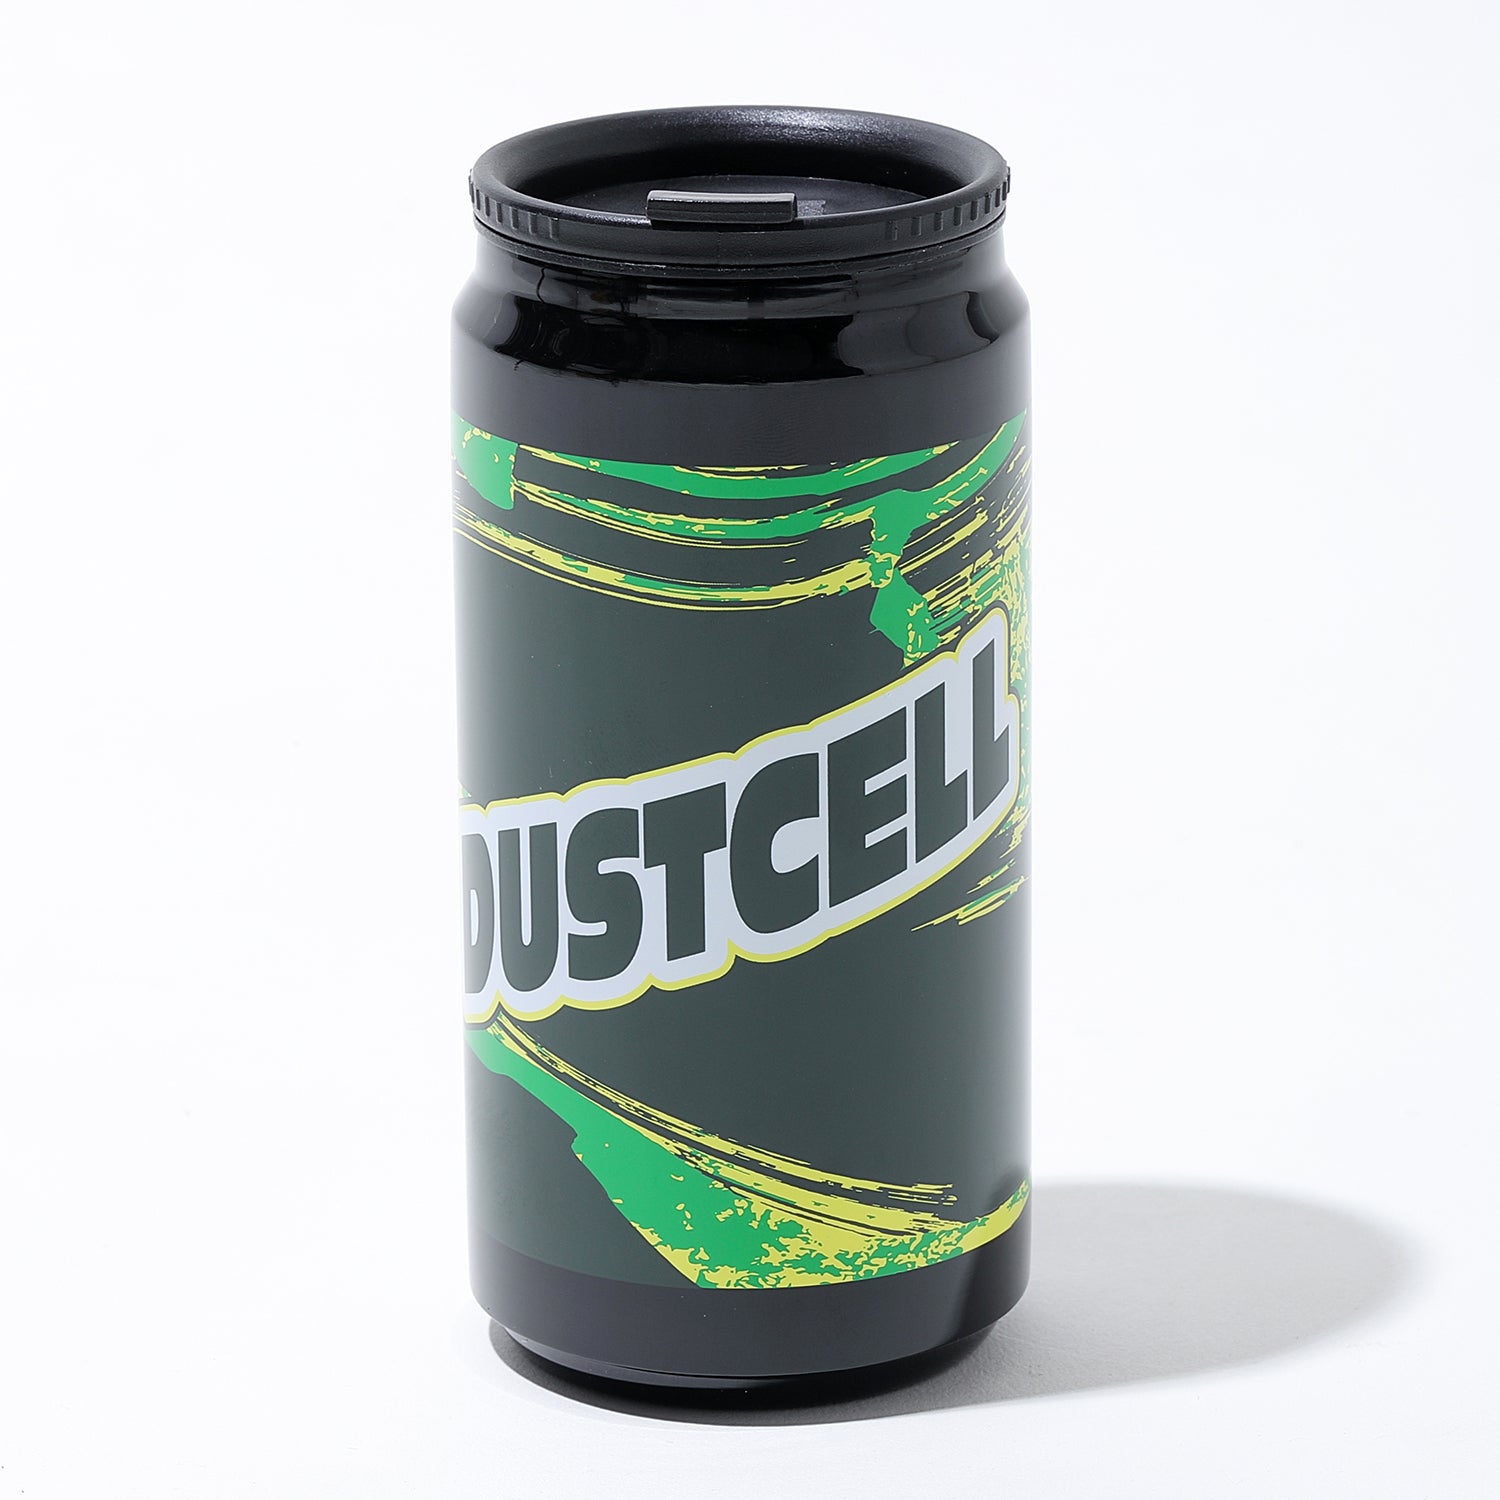 DUSTCELL】エンジニアコート／DUSTCELL Exhibiton 白炎-